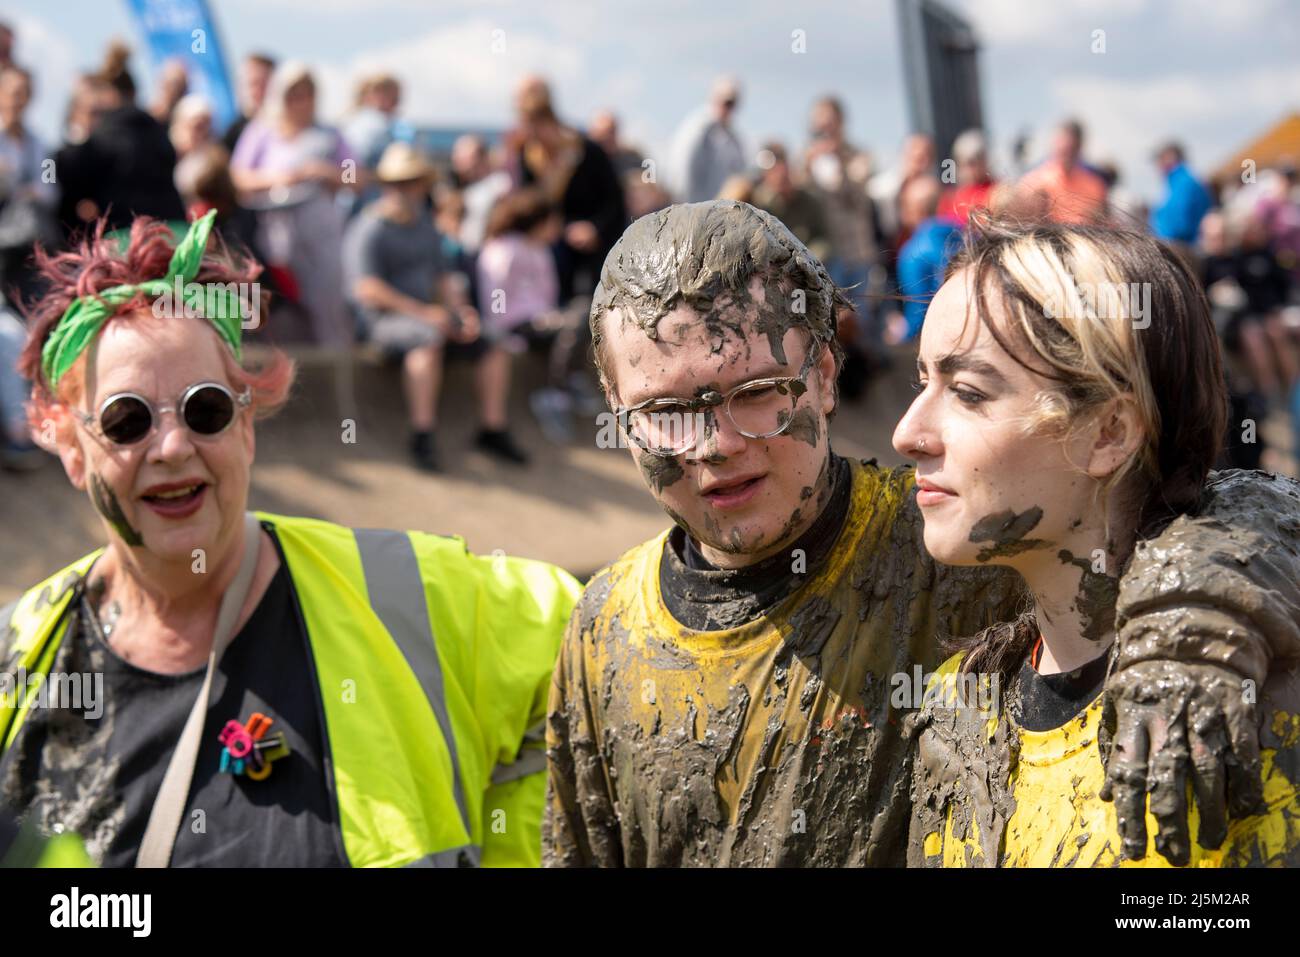 Maldon Promenade Park, Maldon, Essex, UK. 24th Apr, 2022. Maisi Bourke, daughter of Jo Brand and musician and social media star, took part in the Maldon Mud Race alongside her boyfriend Alfie to raise funds for Macmillan Cancer Support. Writing online before the event Maisi wrote: 'We've chosen to support Macmillan Cancer Support in memory of Sean Lock and my Uncle Bill, who were both lost to cancer last year.” Jo Brand welcomed the pair at the finish line, with her daughter wiping mud on Jo’s face Stock Photo